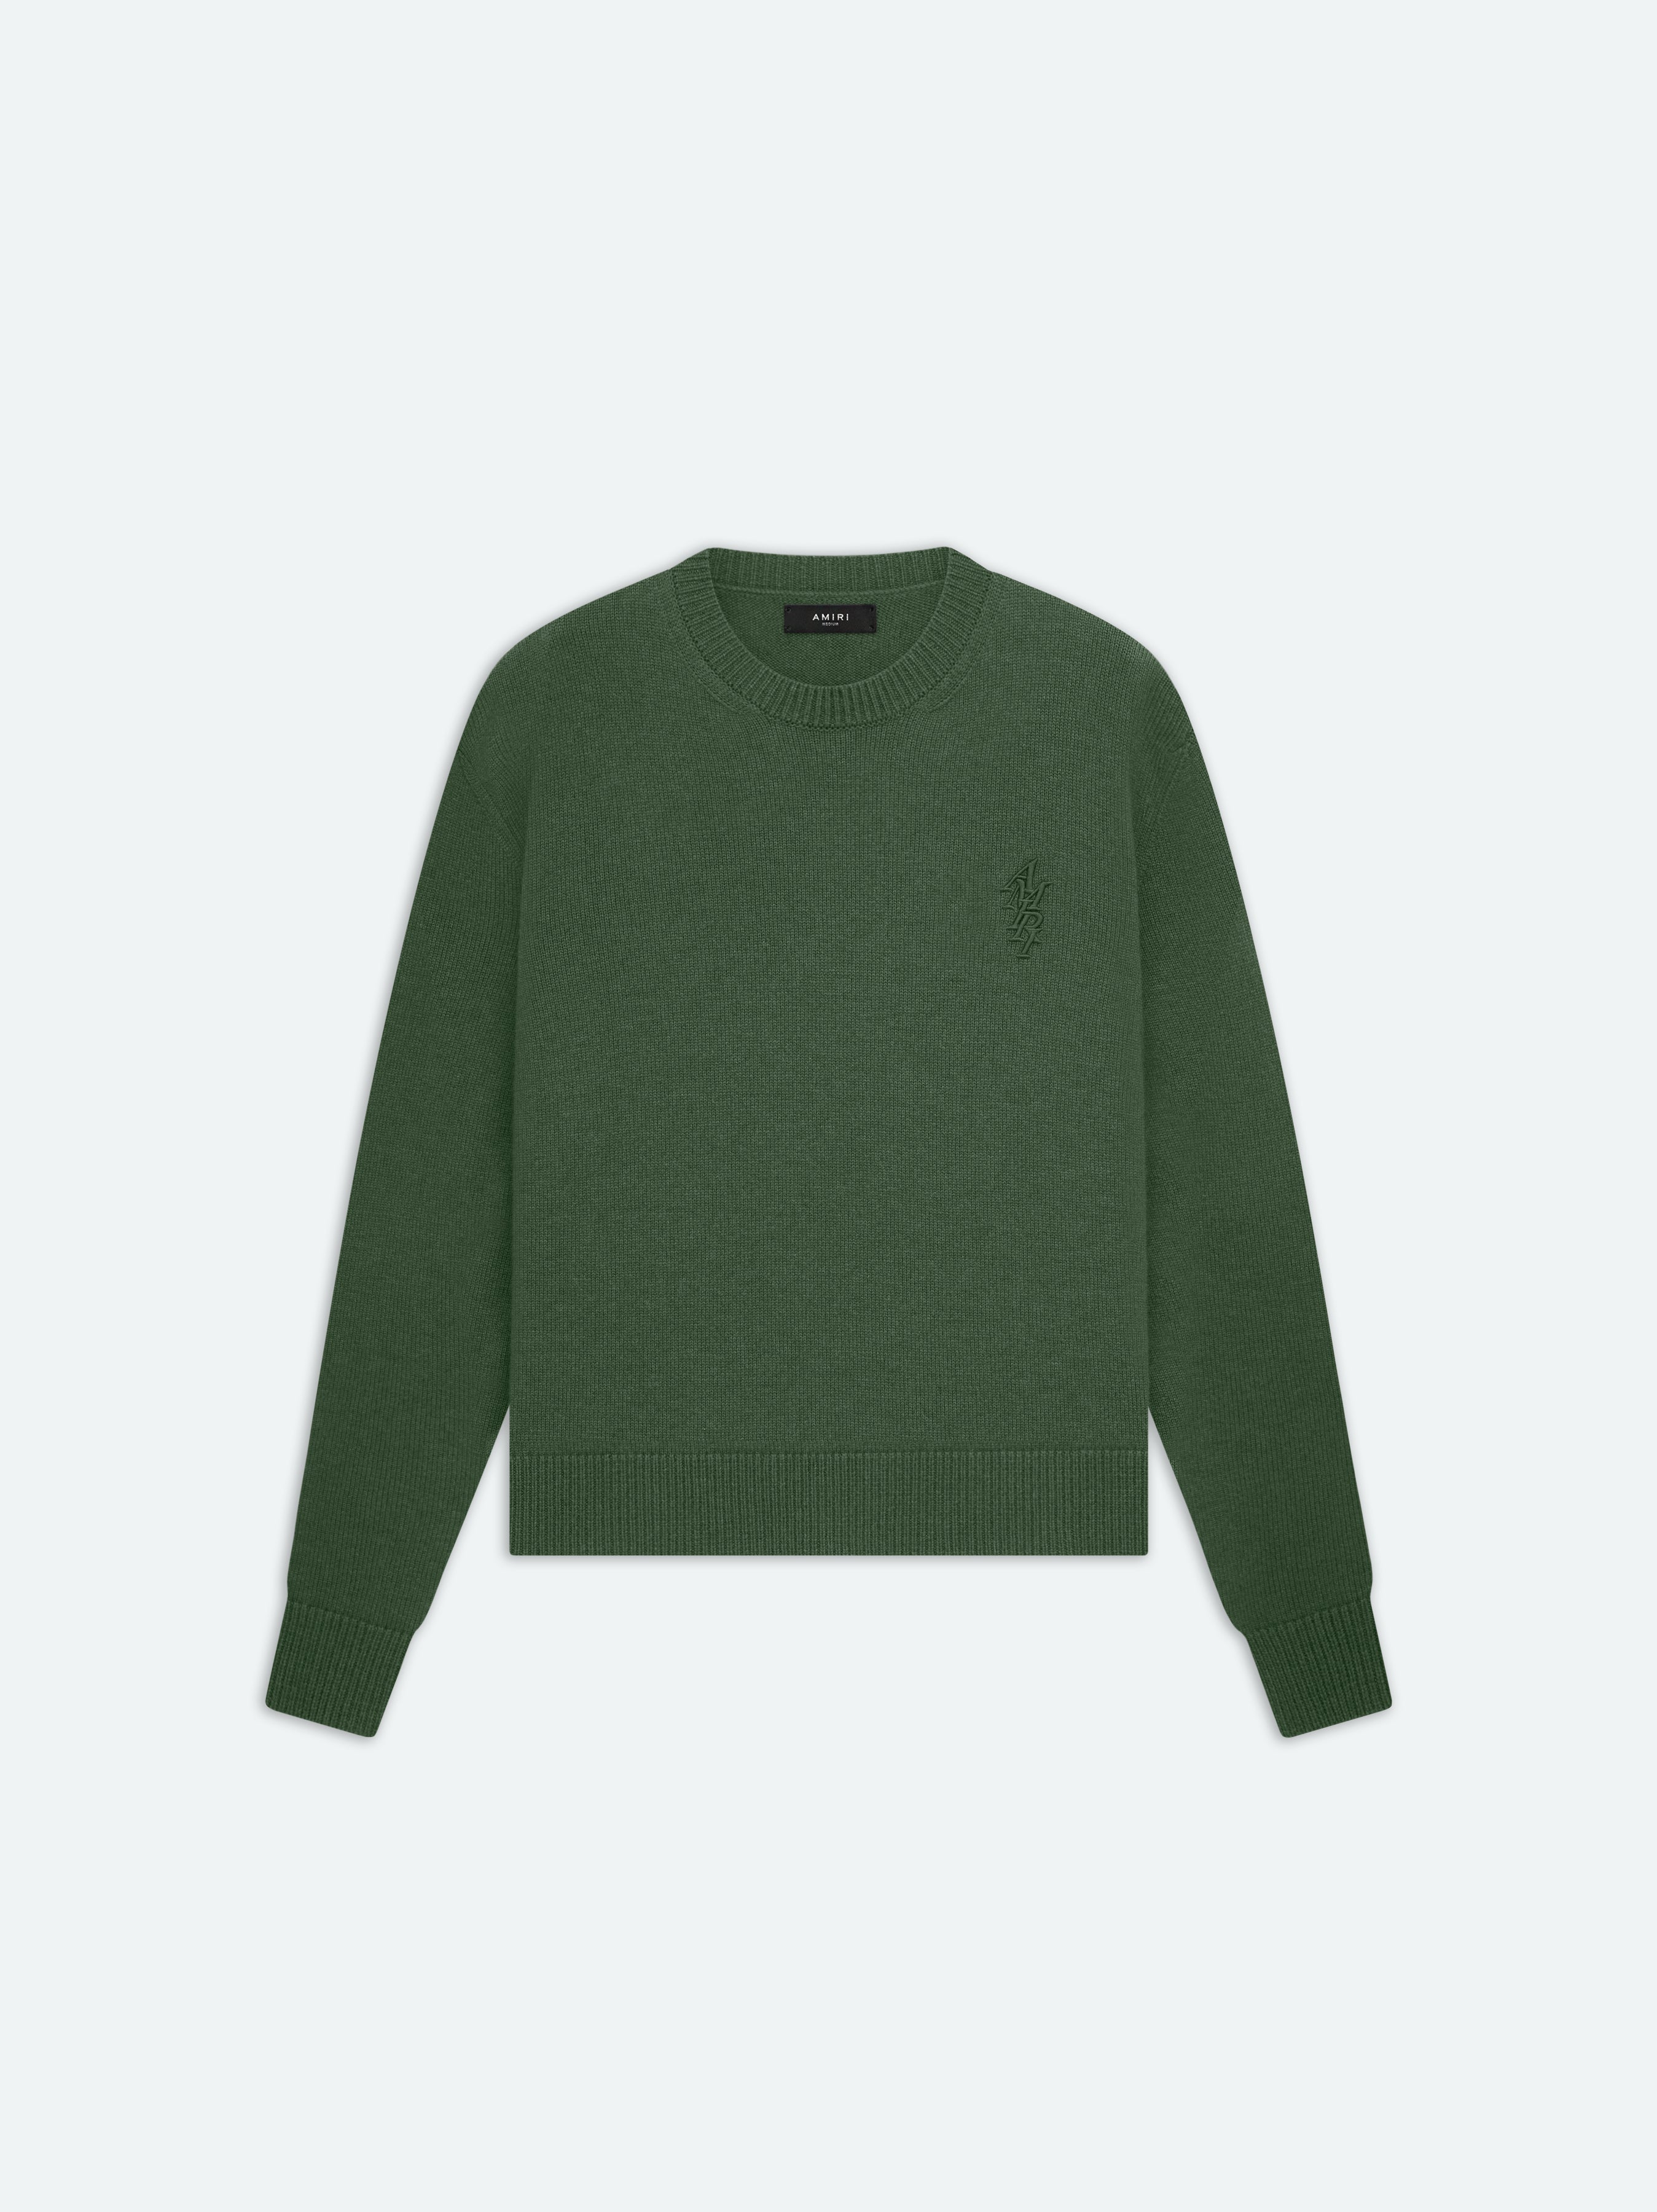 Product AMIRI STACK CREWNECK - Spindle Tree featured image